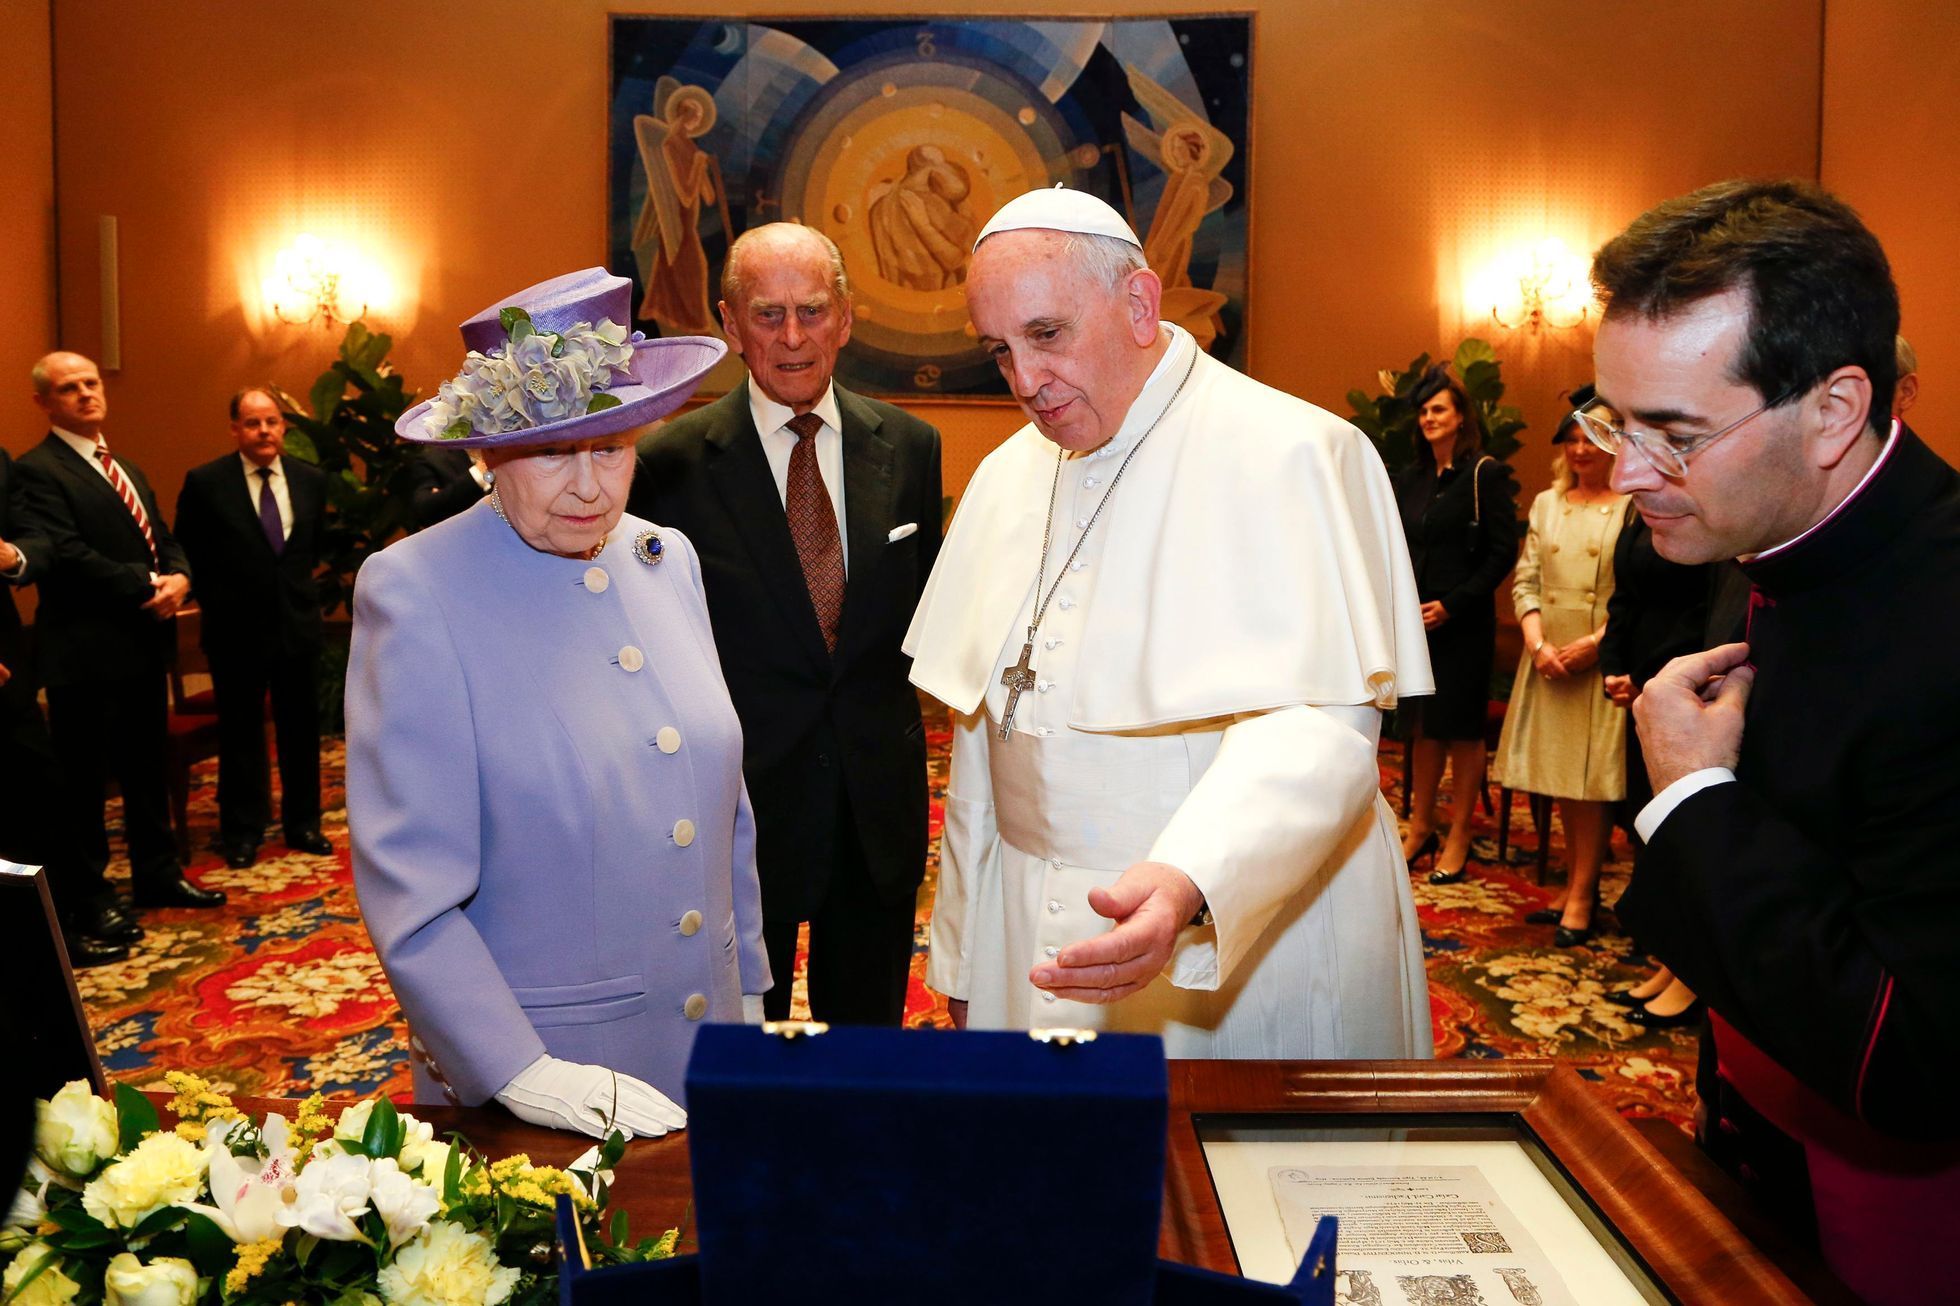 Pope Francis presents gift to Britain's Queen Elizabeth as Prince Philip looks on during a meeting at the Vatican